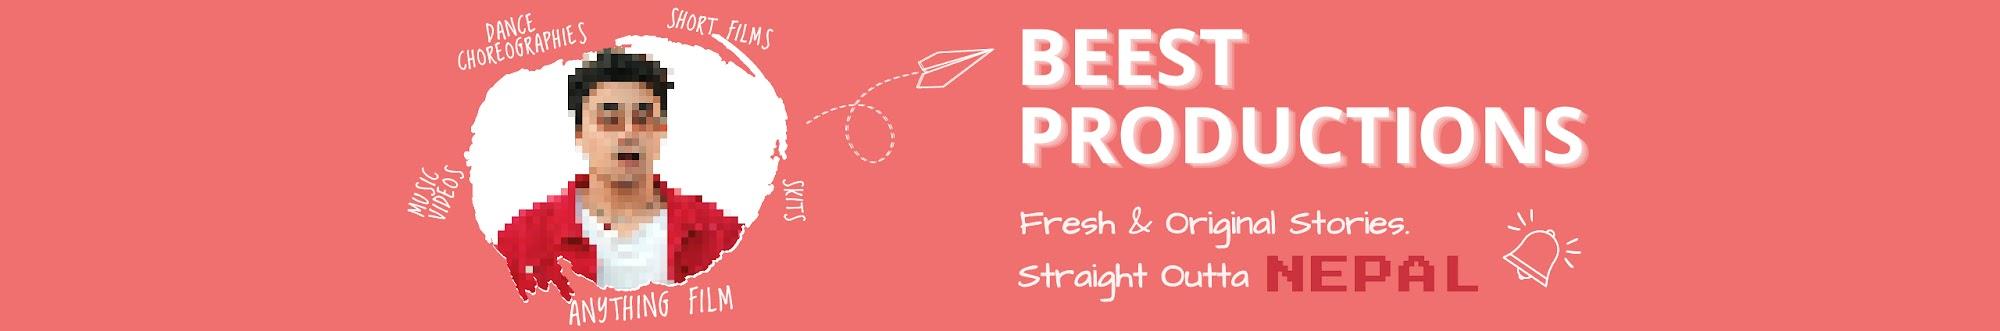 Beest Productions